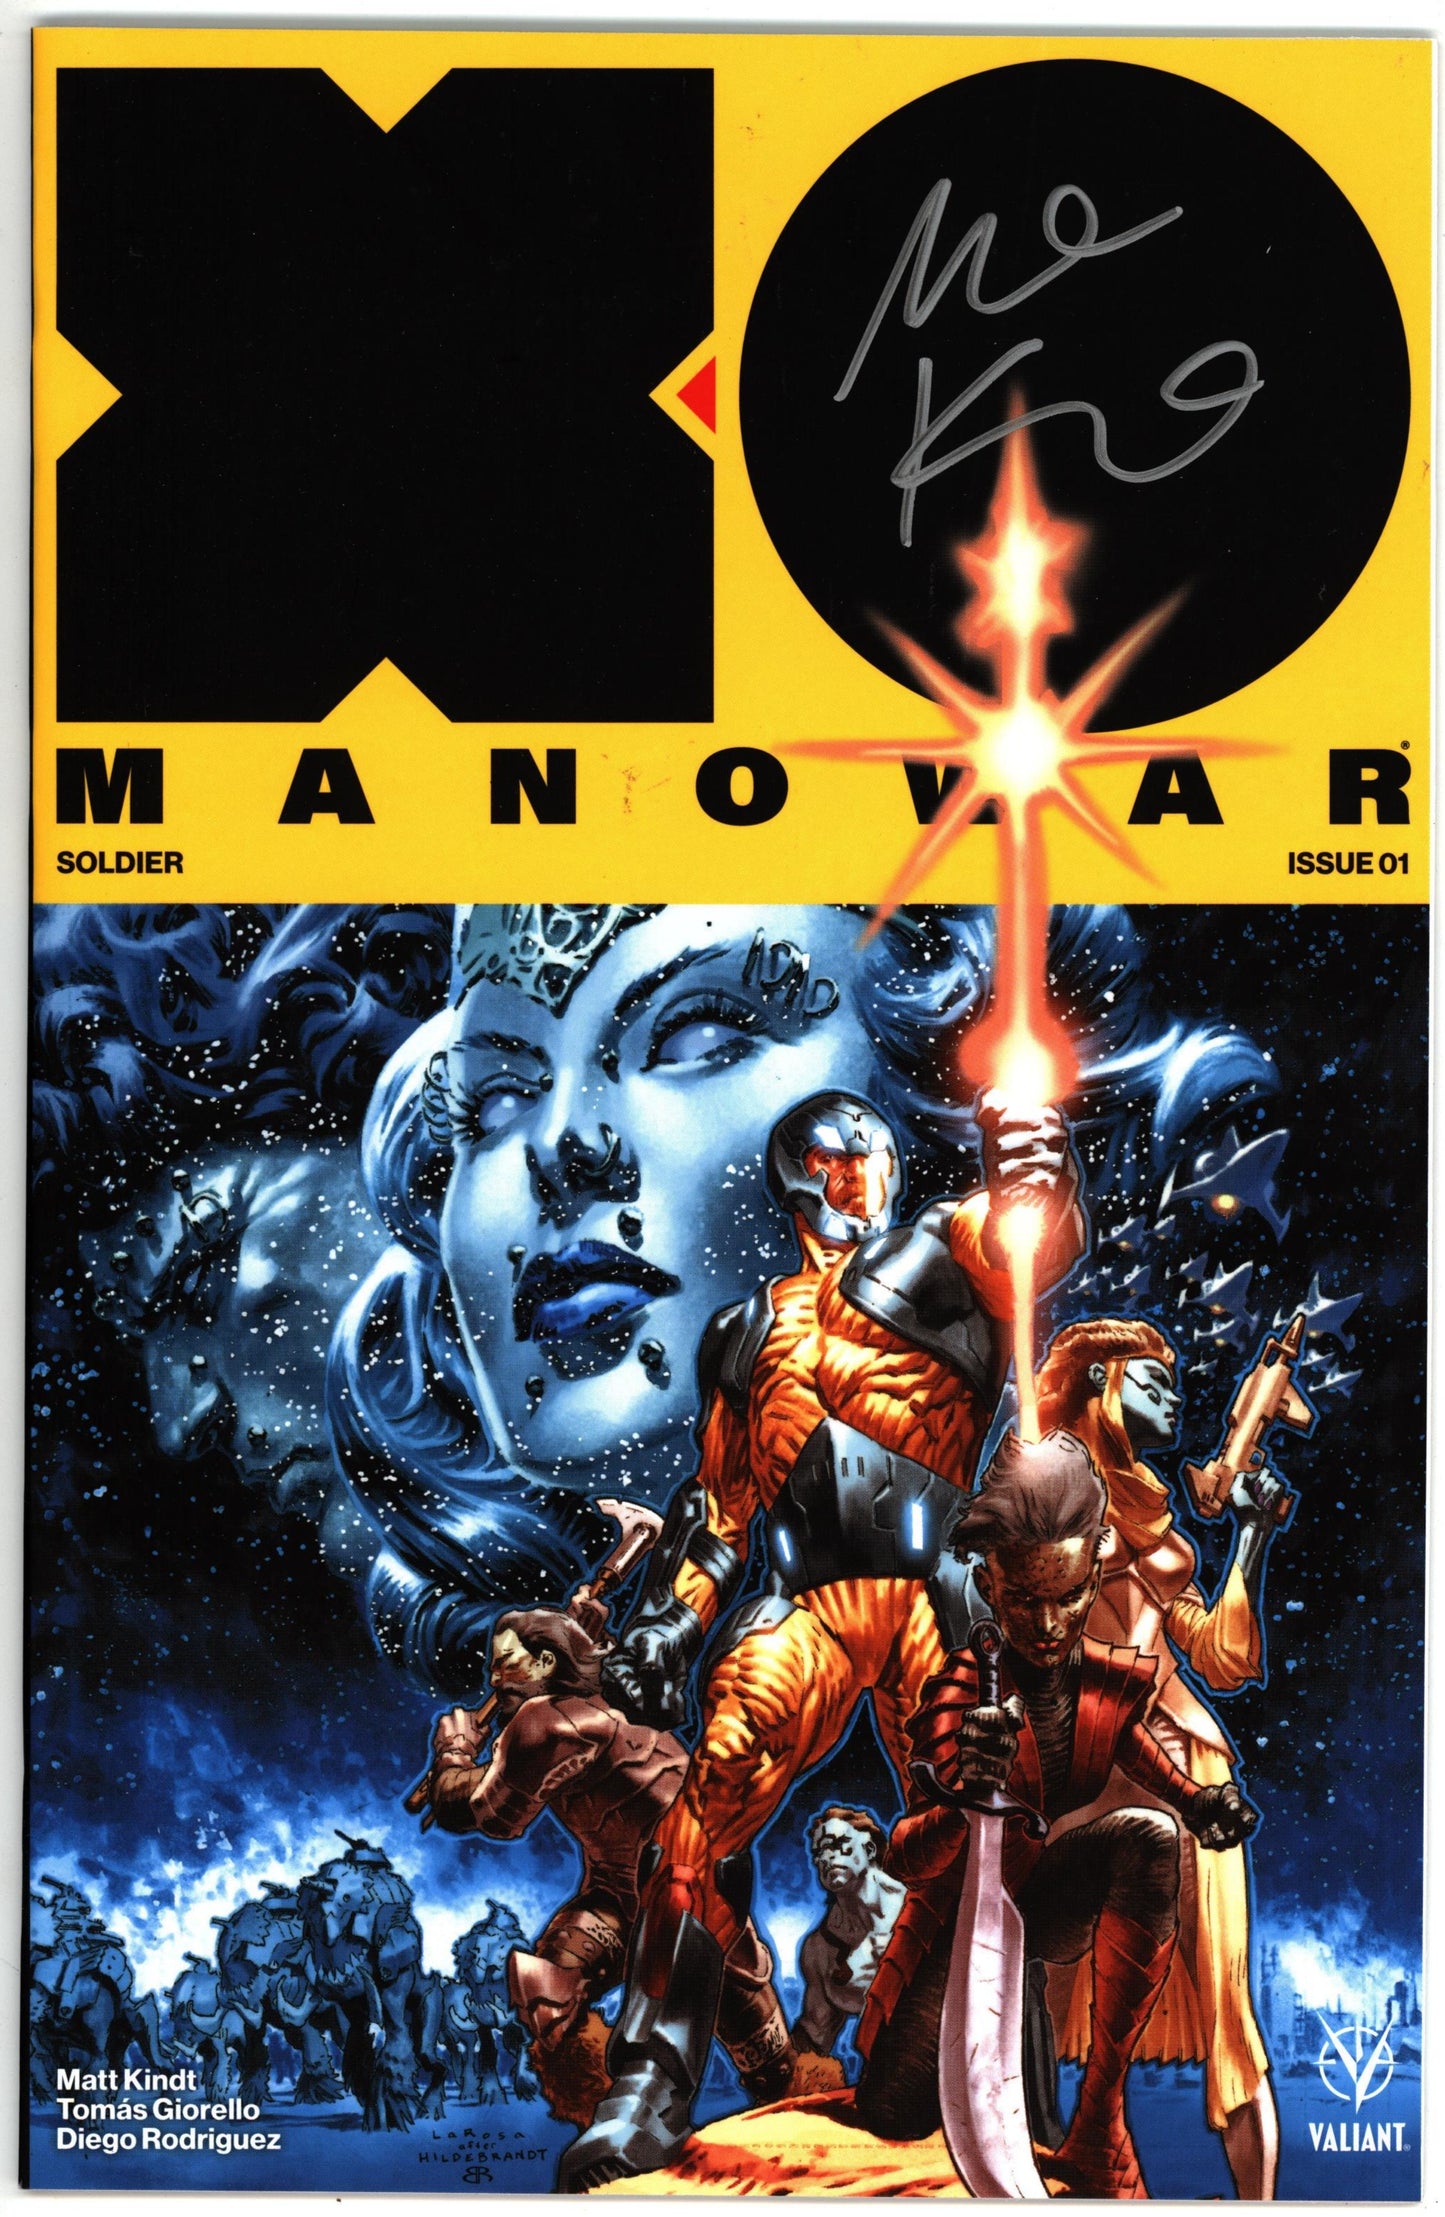 X-O Manowar (2017) #1 Cover A Signed